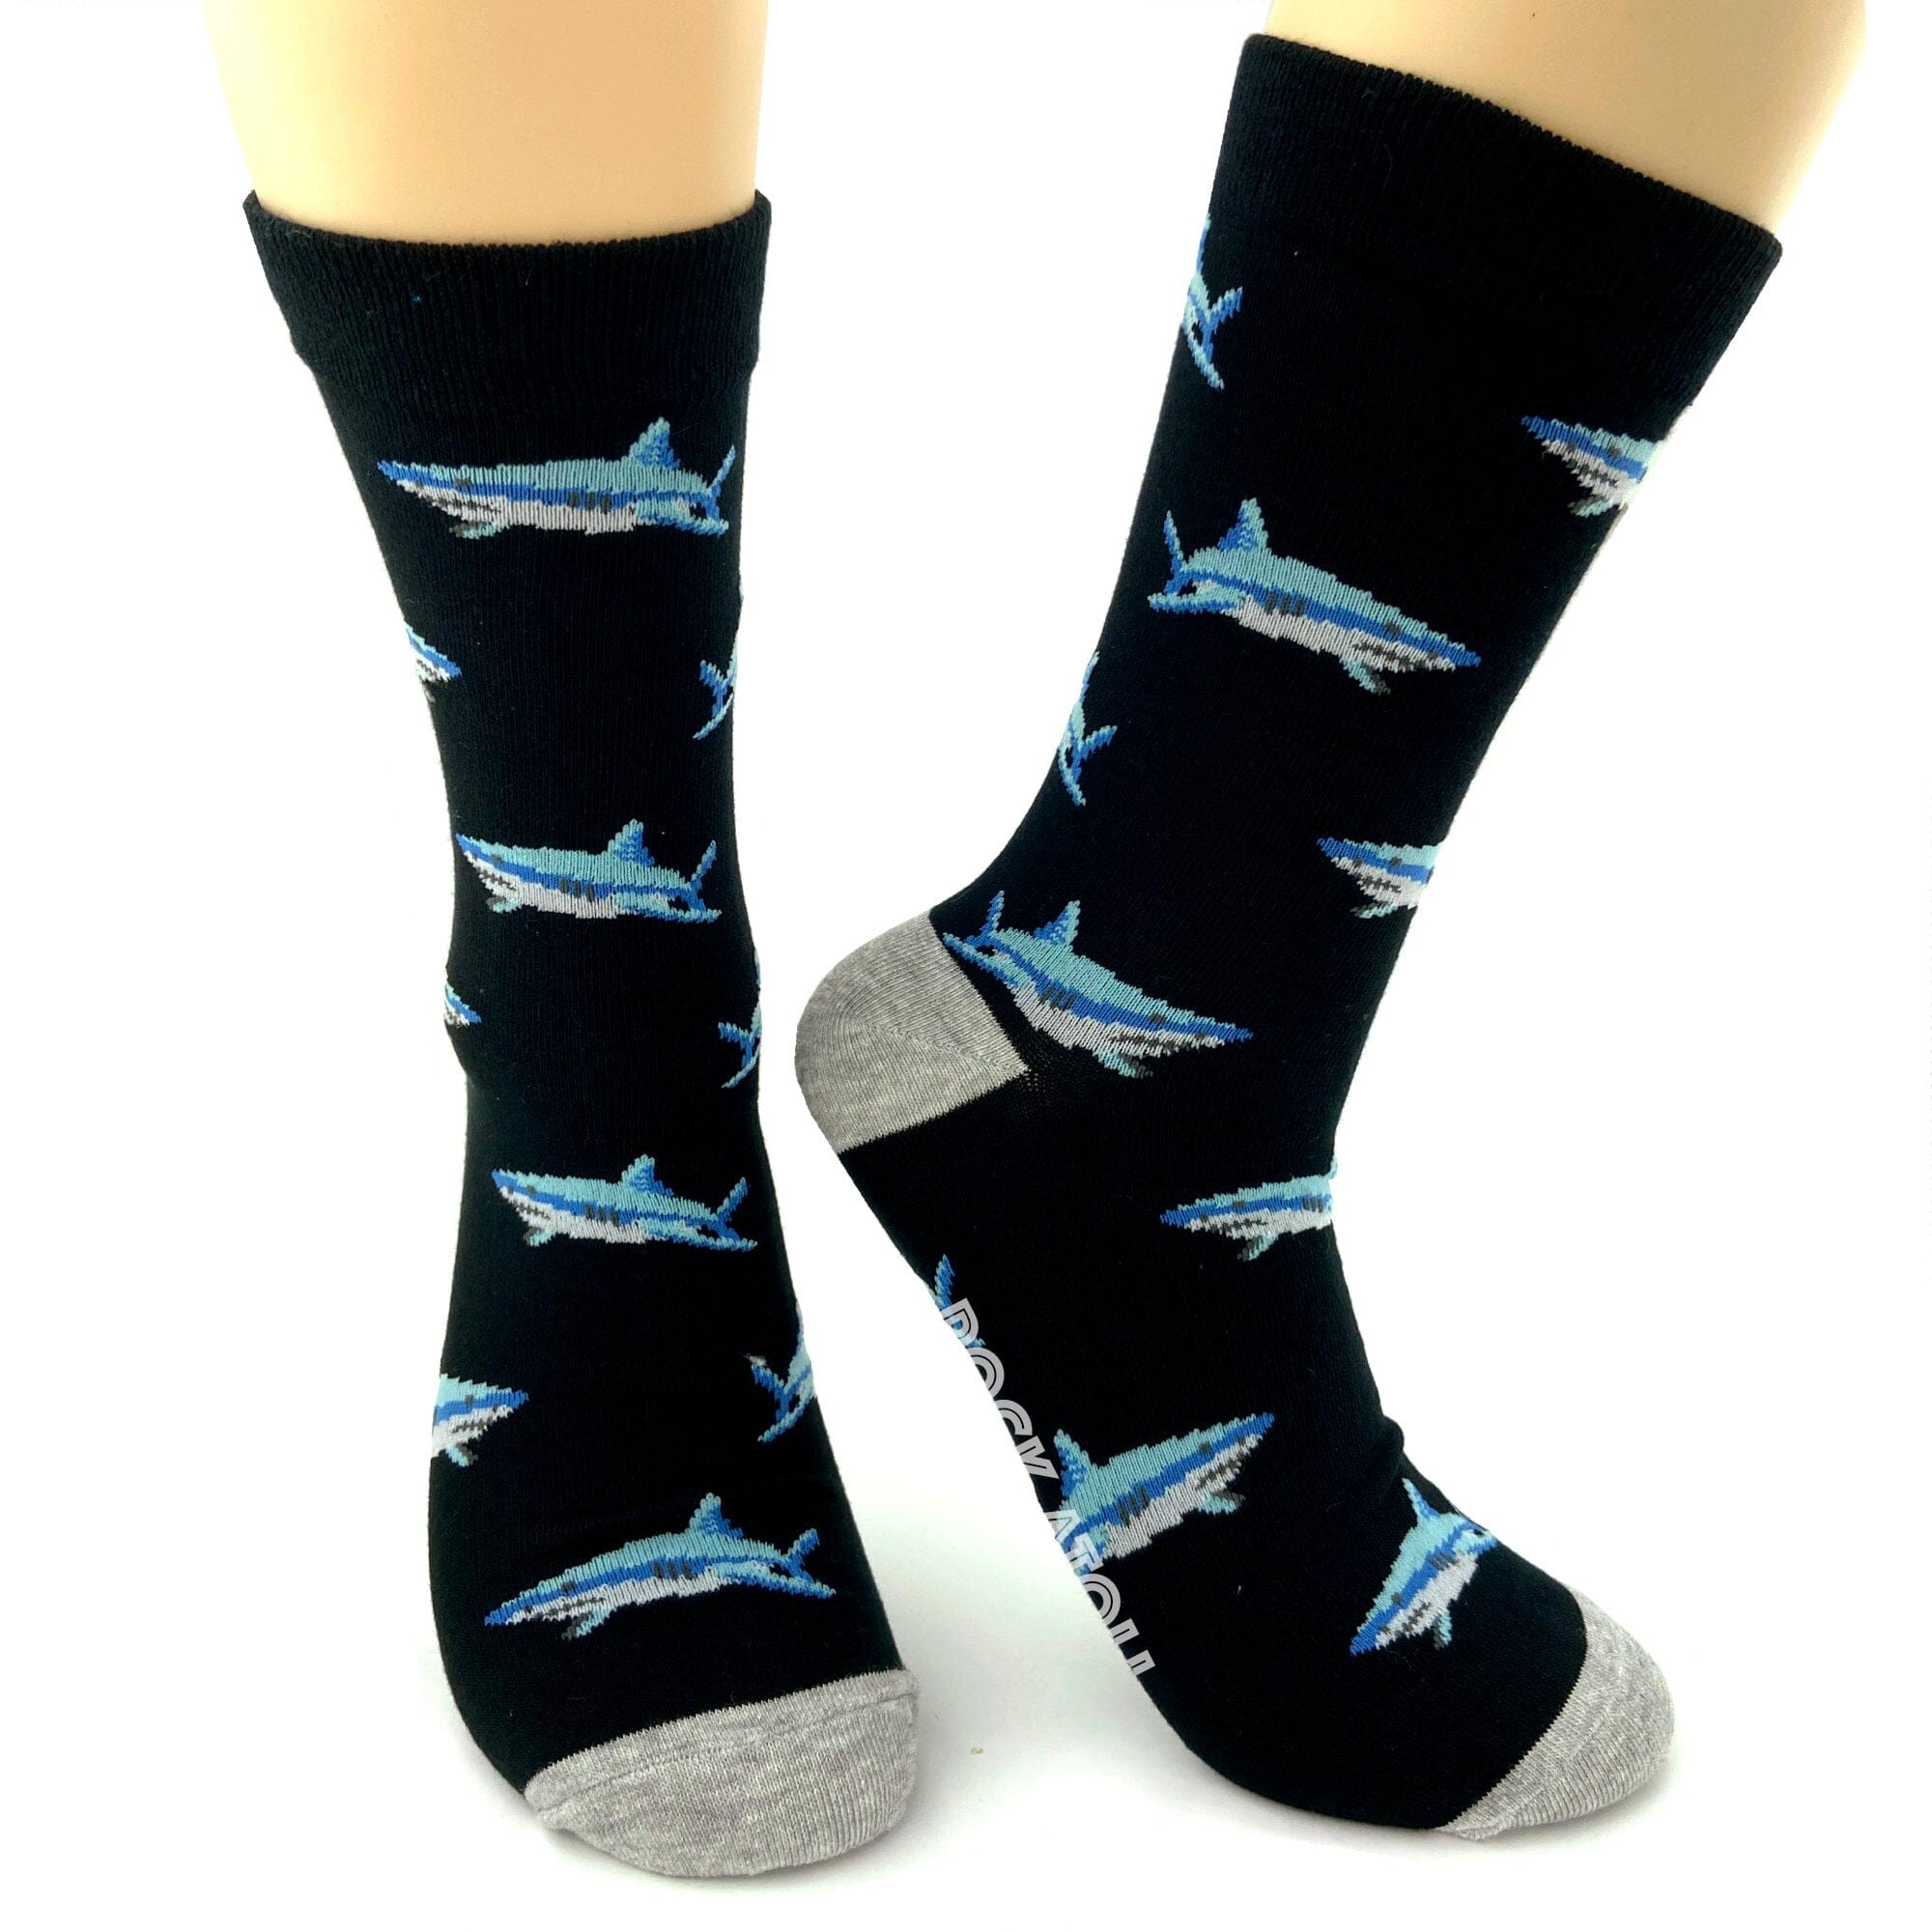 Classic Black Patterned Novelty Crew Socks with Sharks All Over Them